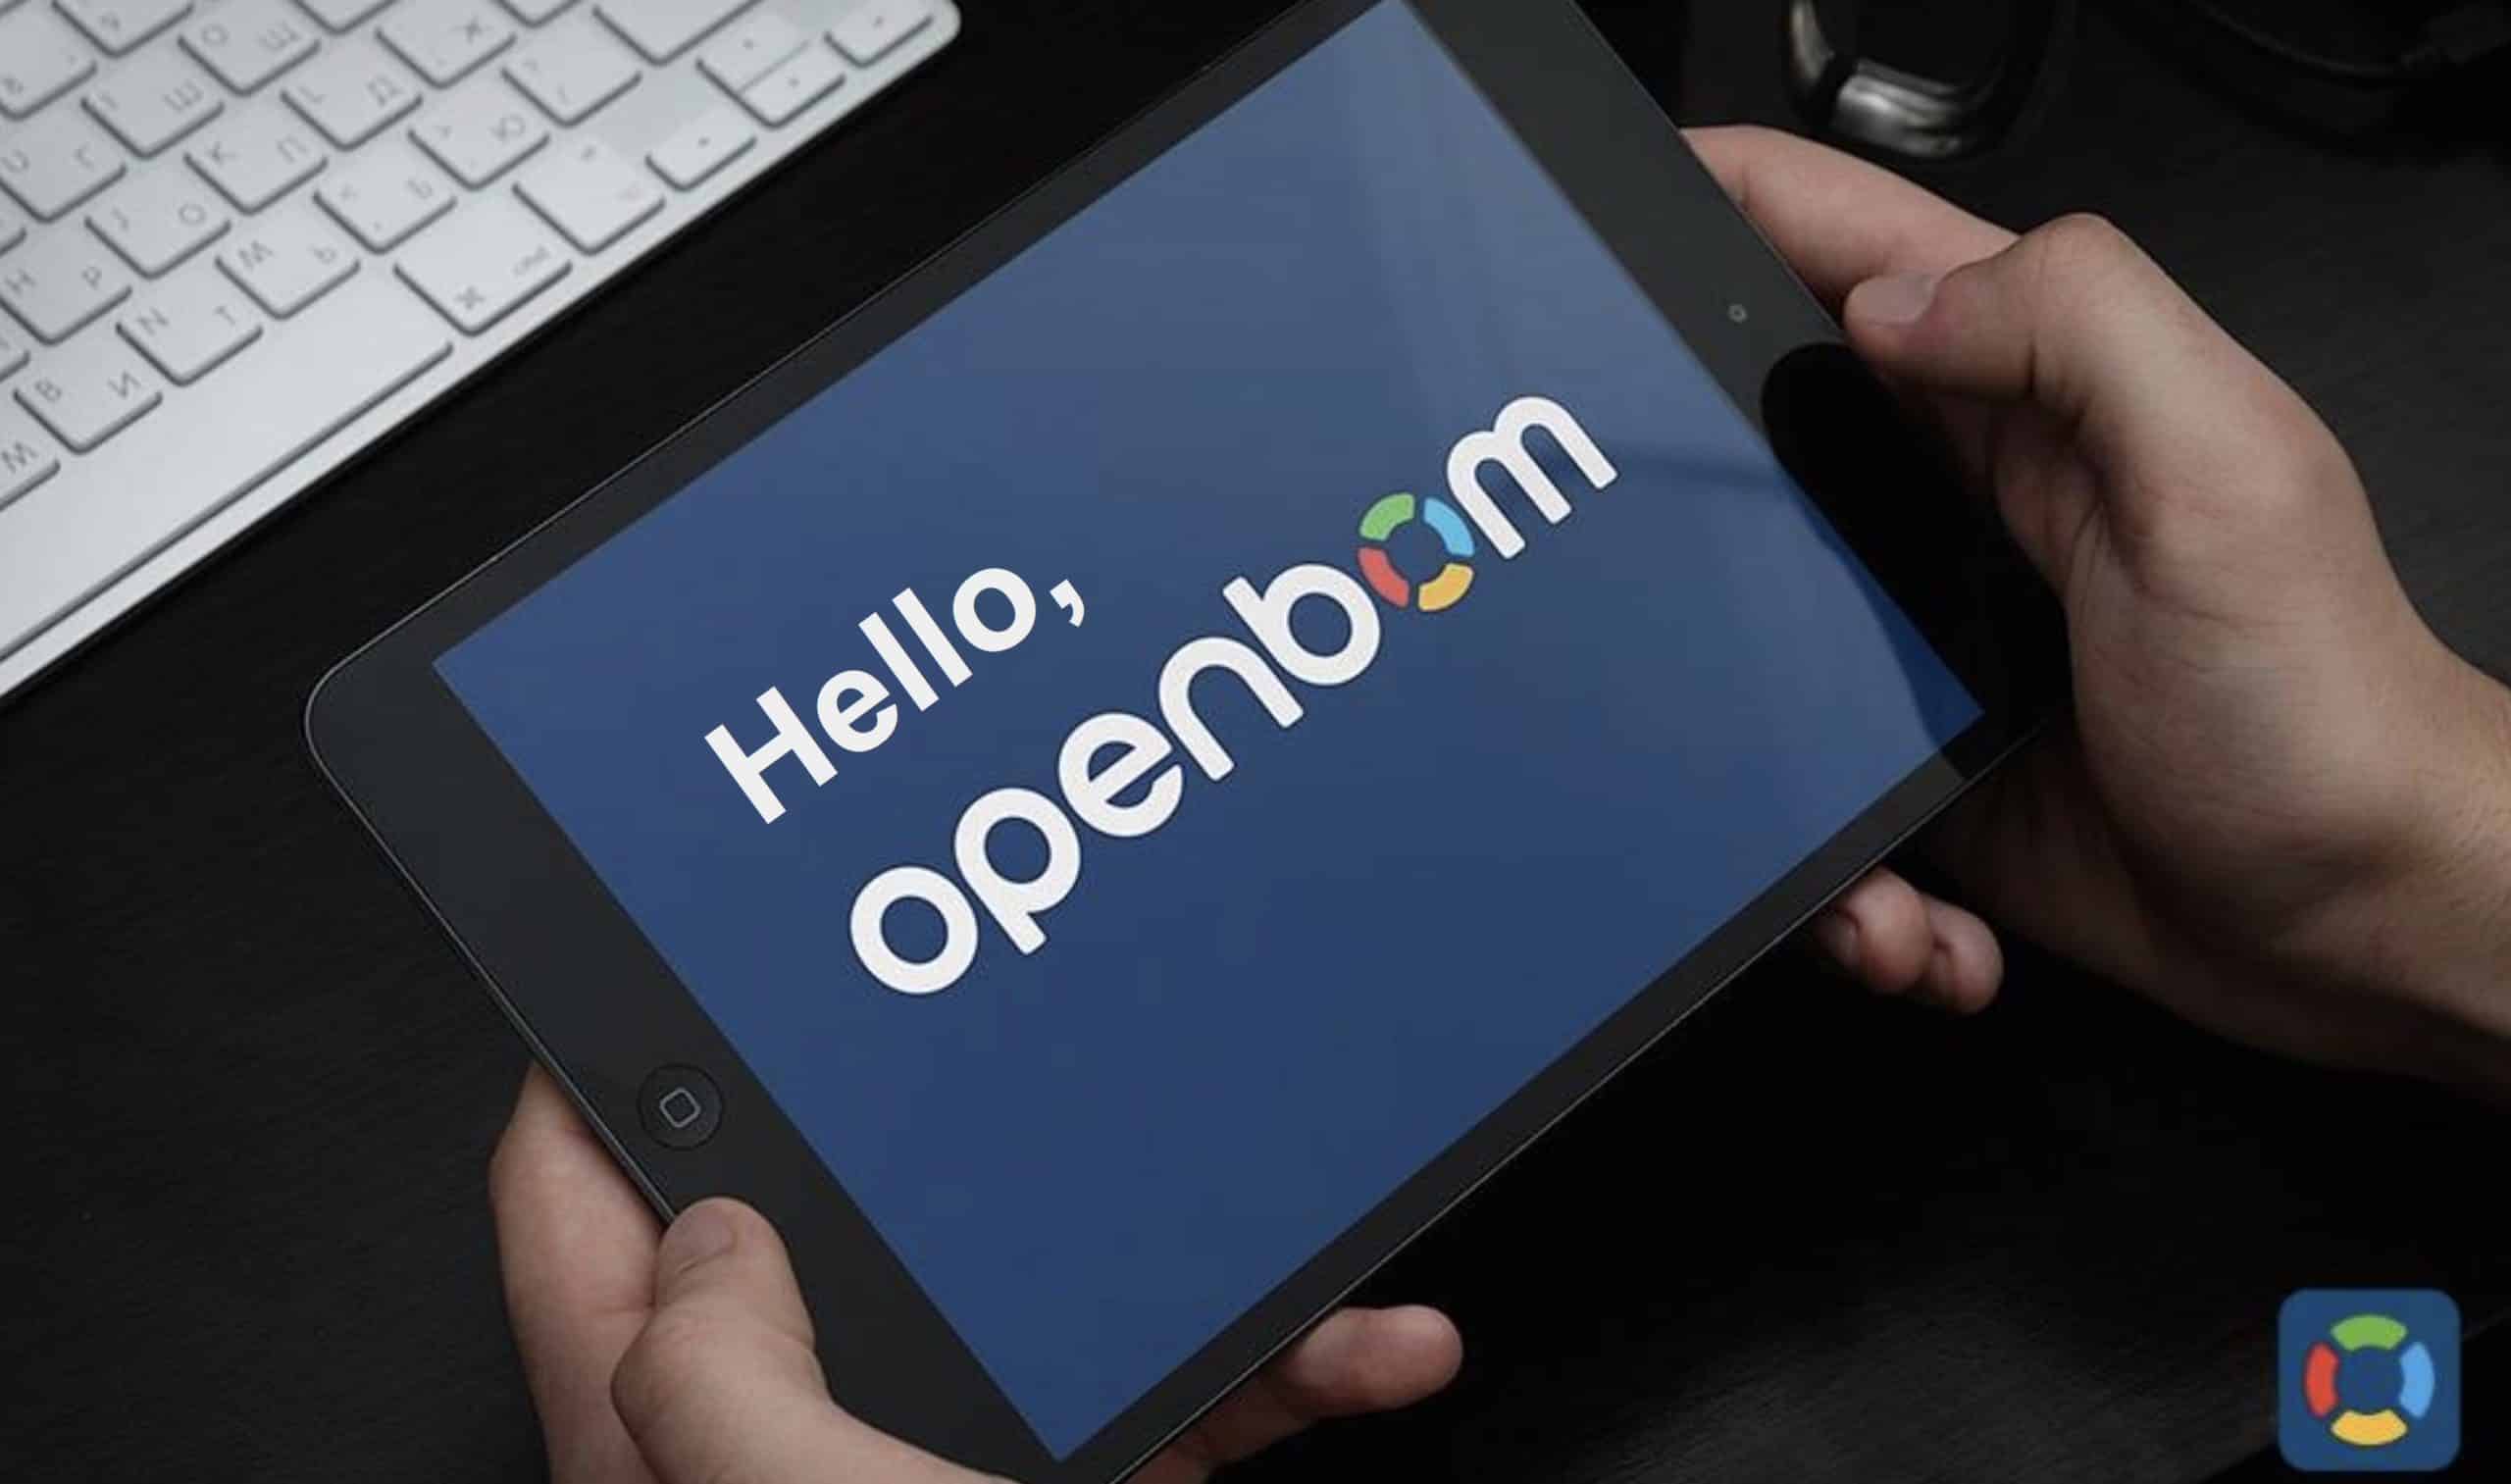 From Screws to Chocolate – A New Set of OpenBOM Demo Data Is Coming